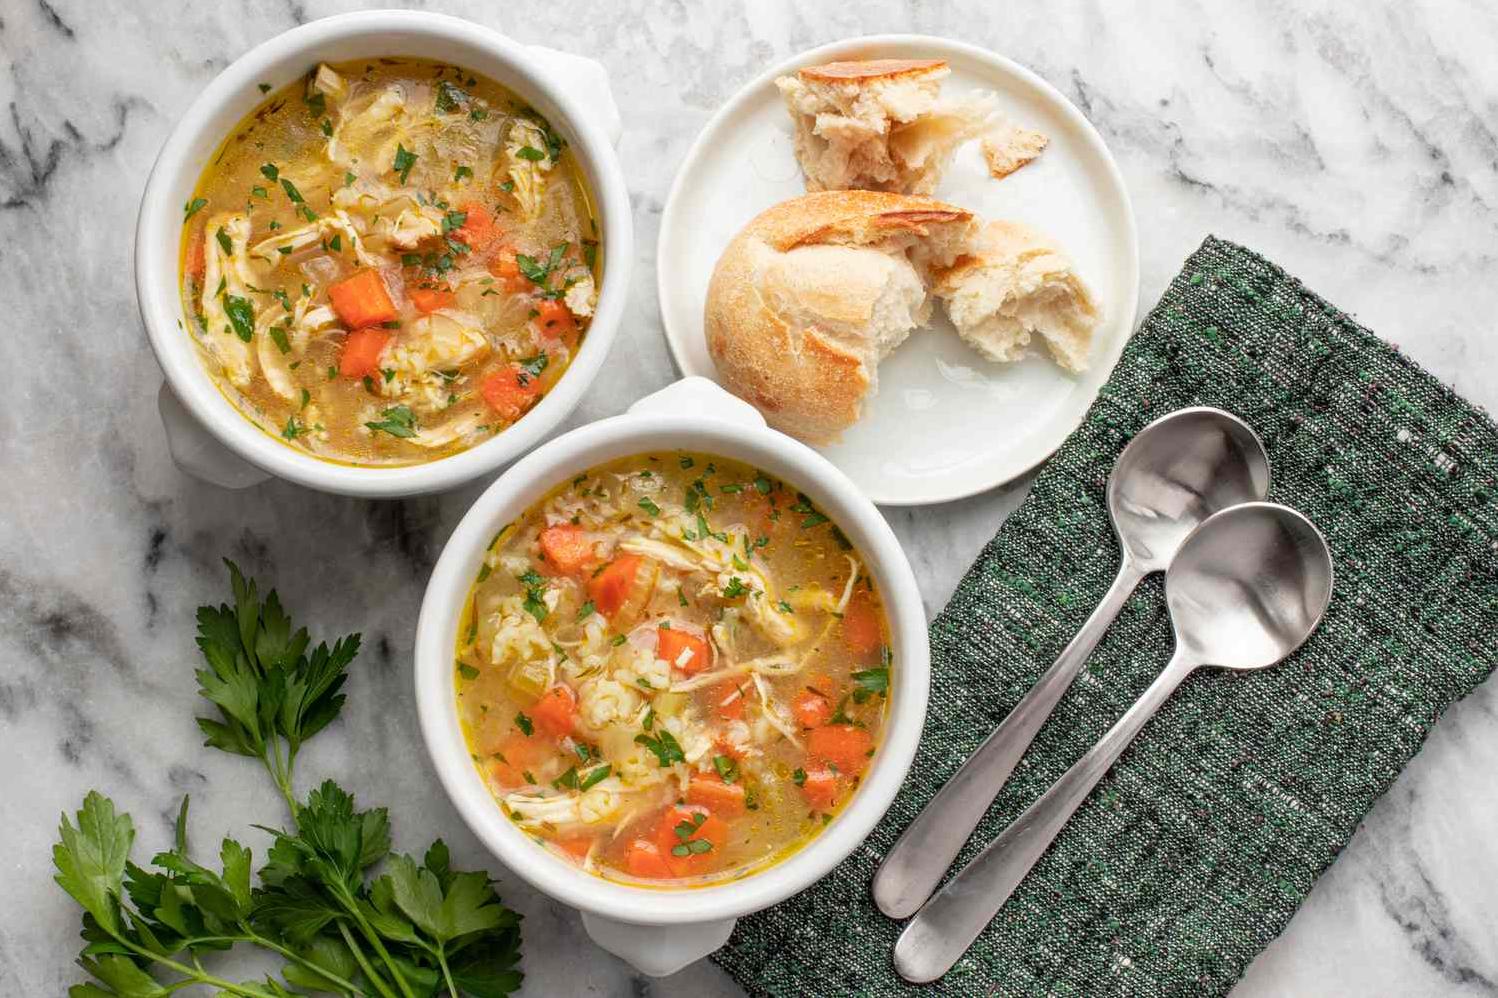  Creamy and savory: Chicken and rice soup that hits the spot